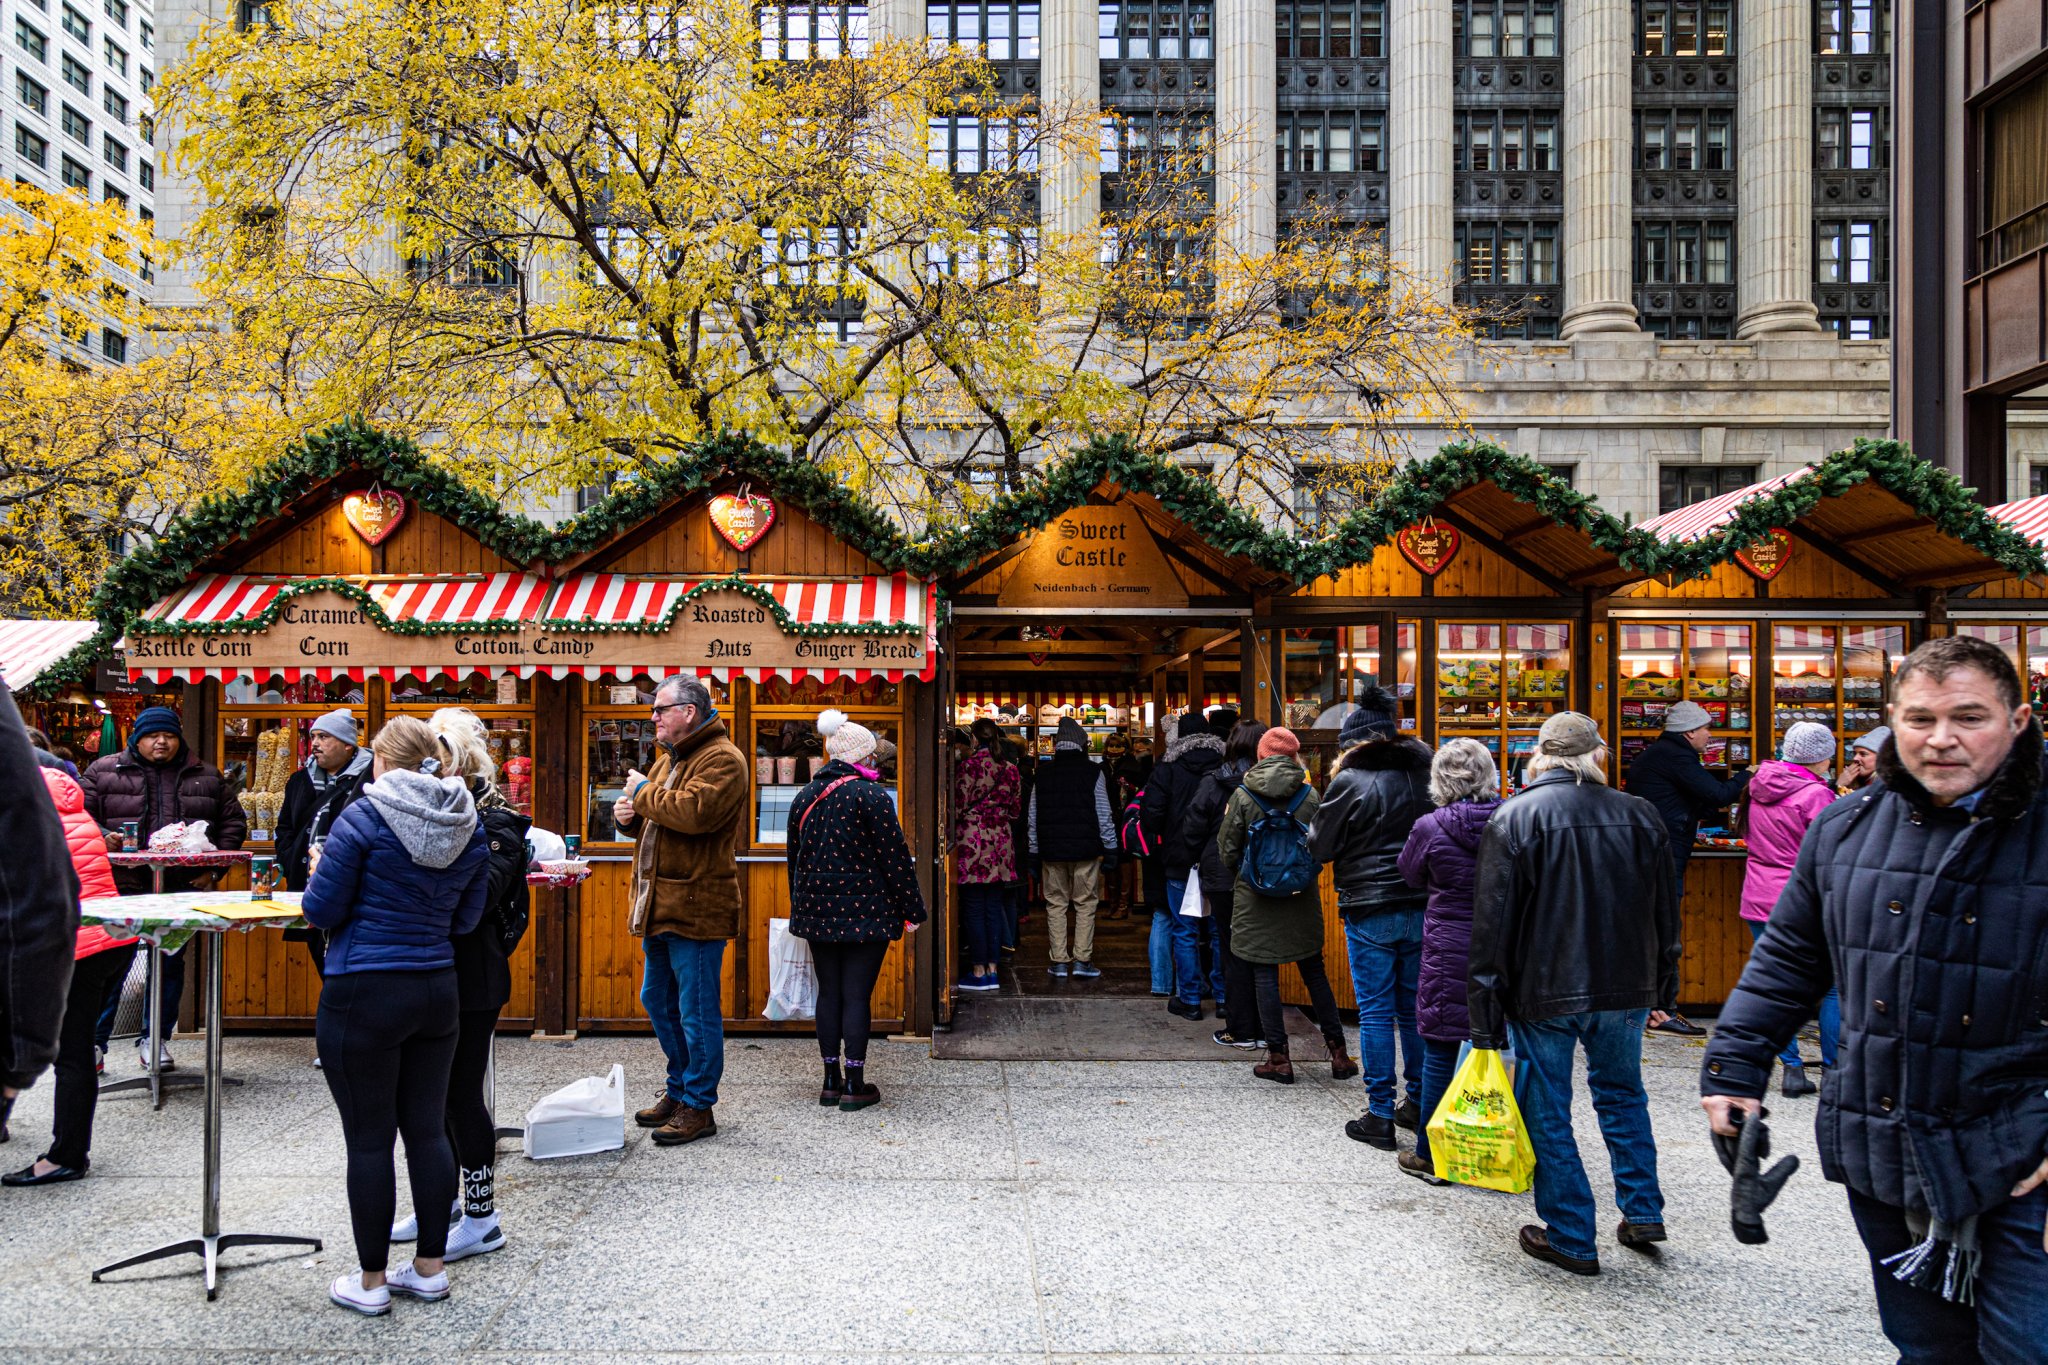 What to eat and drink at Christkindlmarket